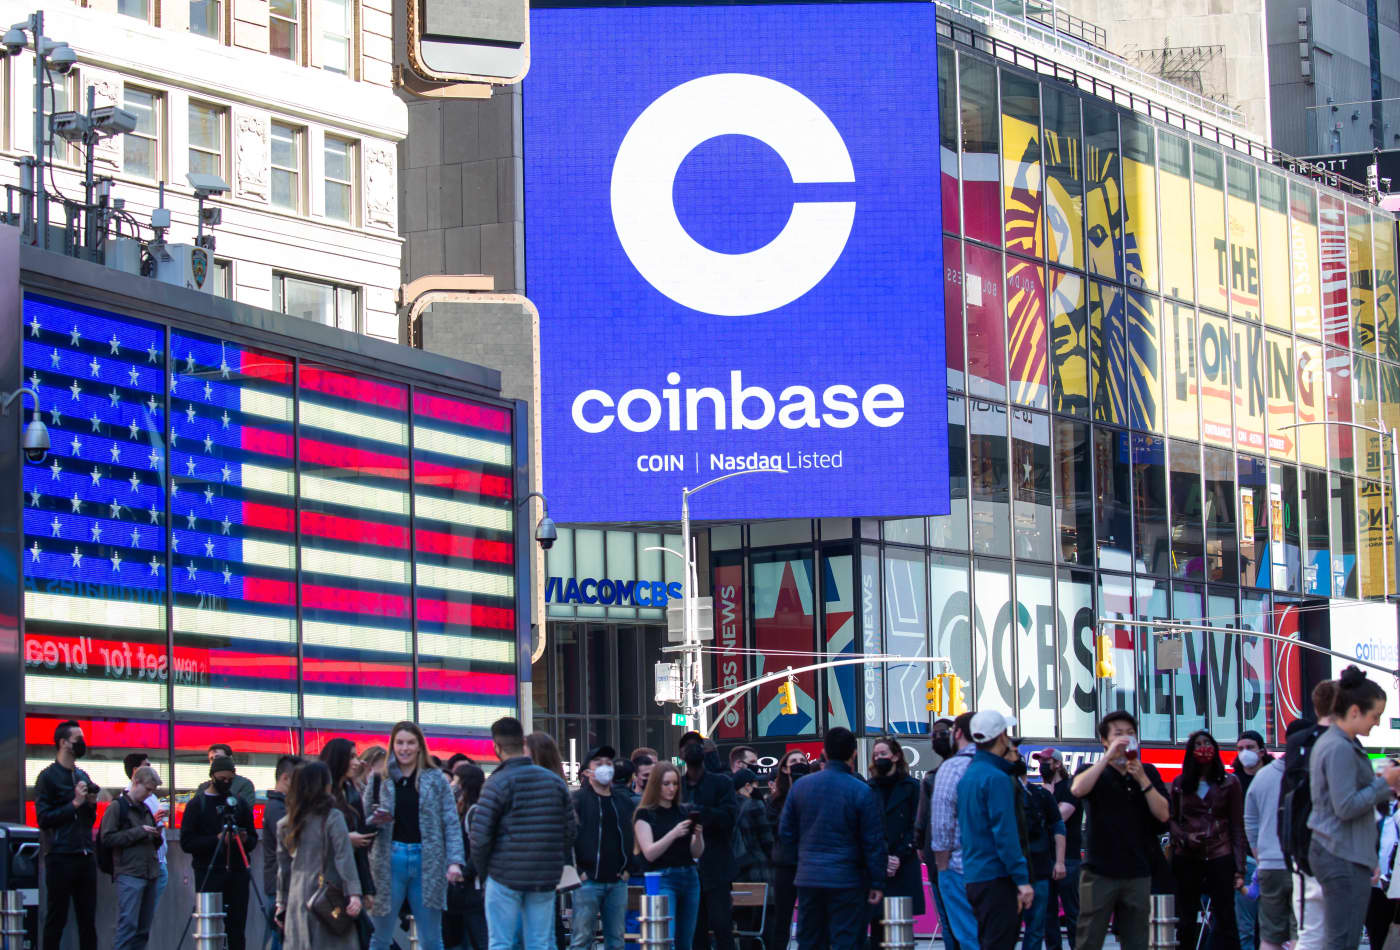 Raymond James gives Coinbase its first sell rating on Wall ...